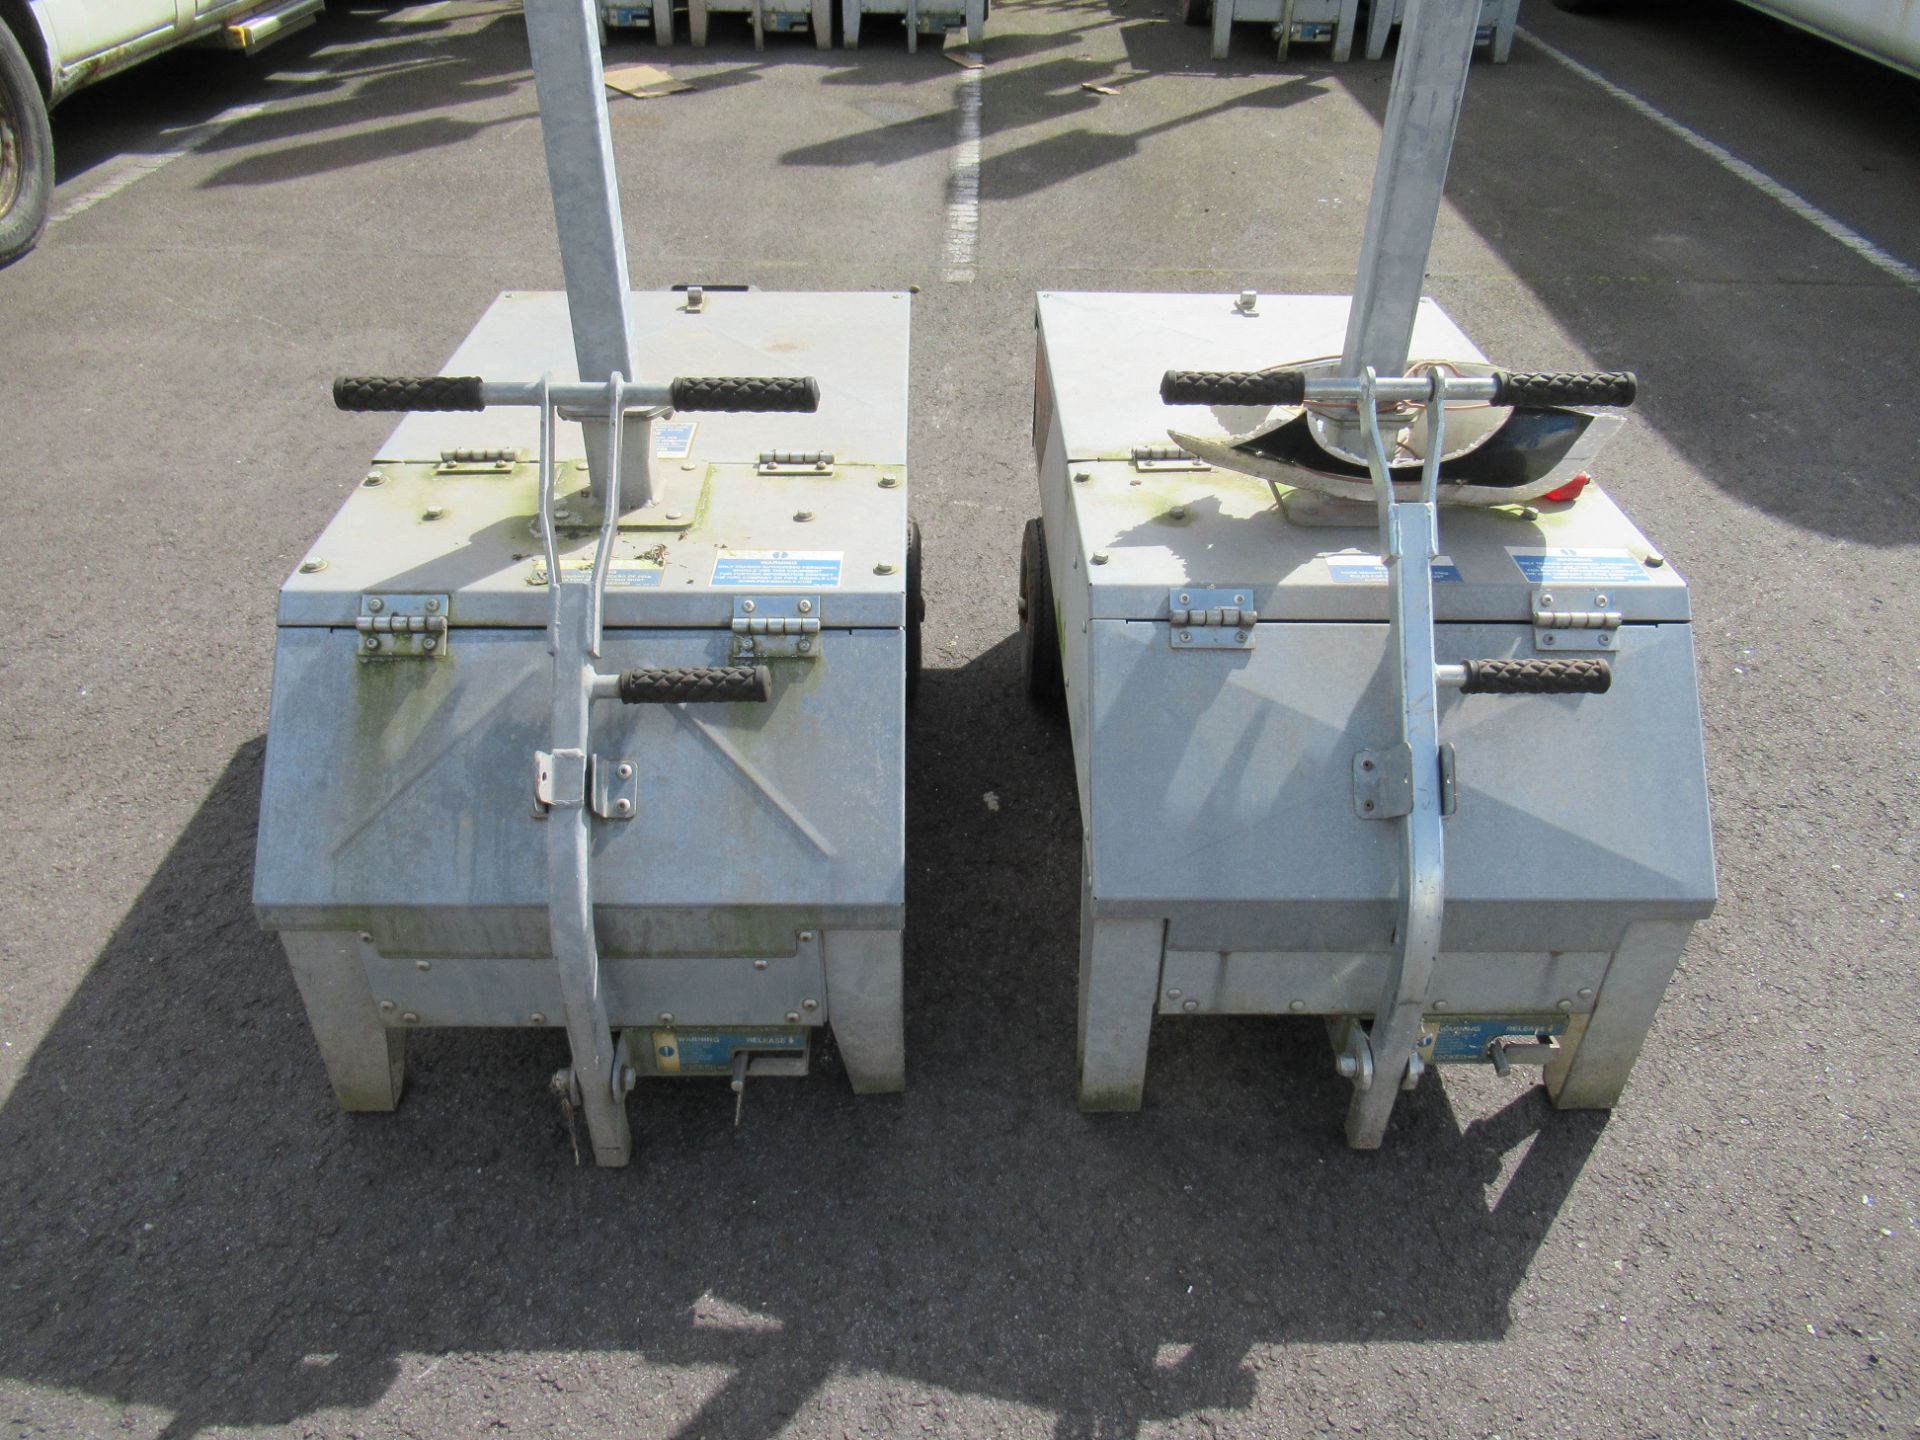 A Pair of Pike Signals Ltd "Pedestrian" Battery Powered Portable Traffic Light Units - Image 4 of 7